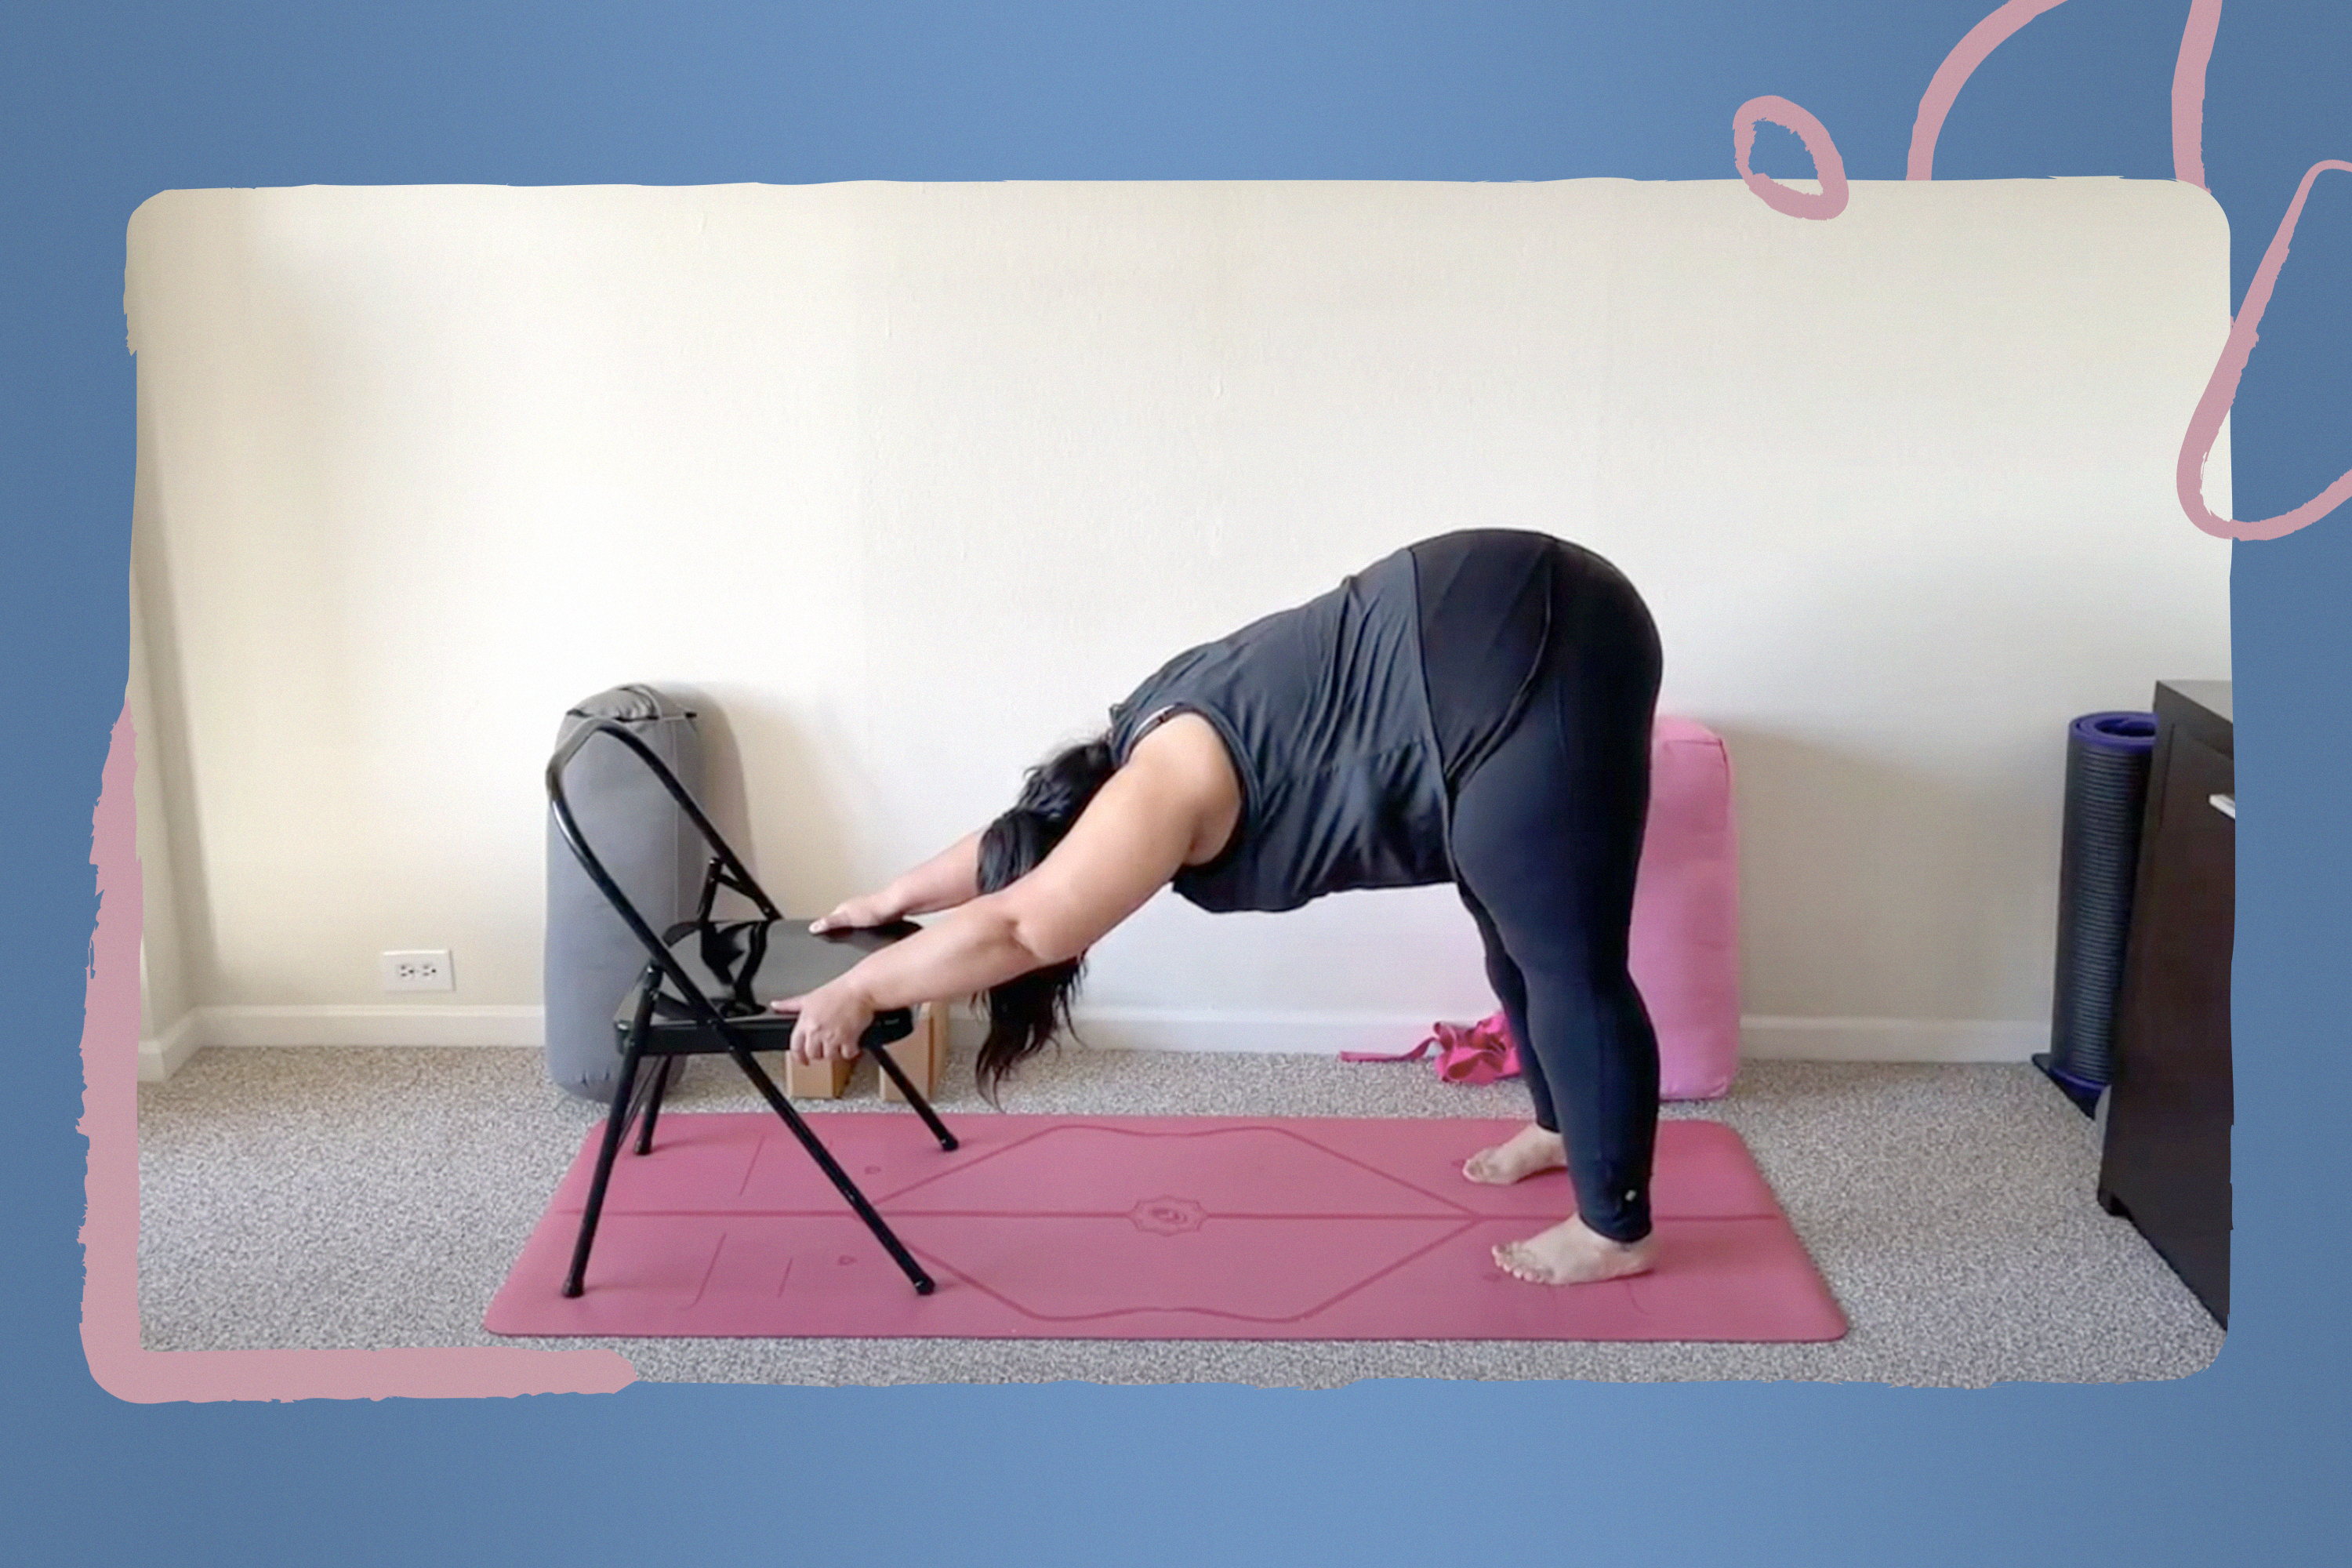 Yoga poses OK for those with poor balance - with a wall or chair